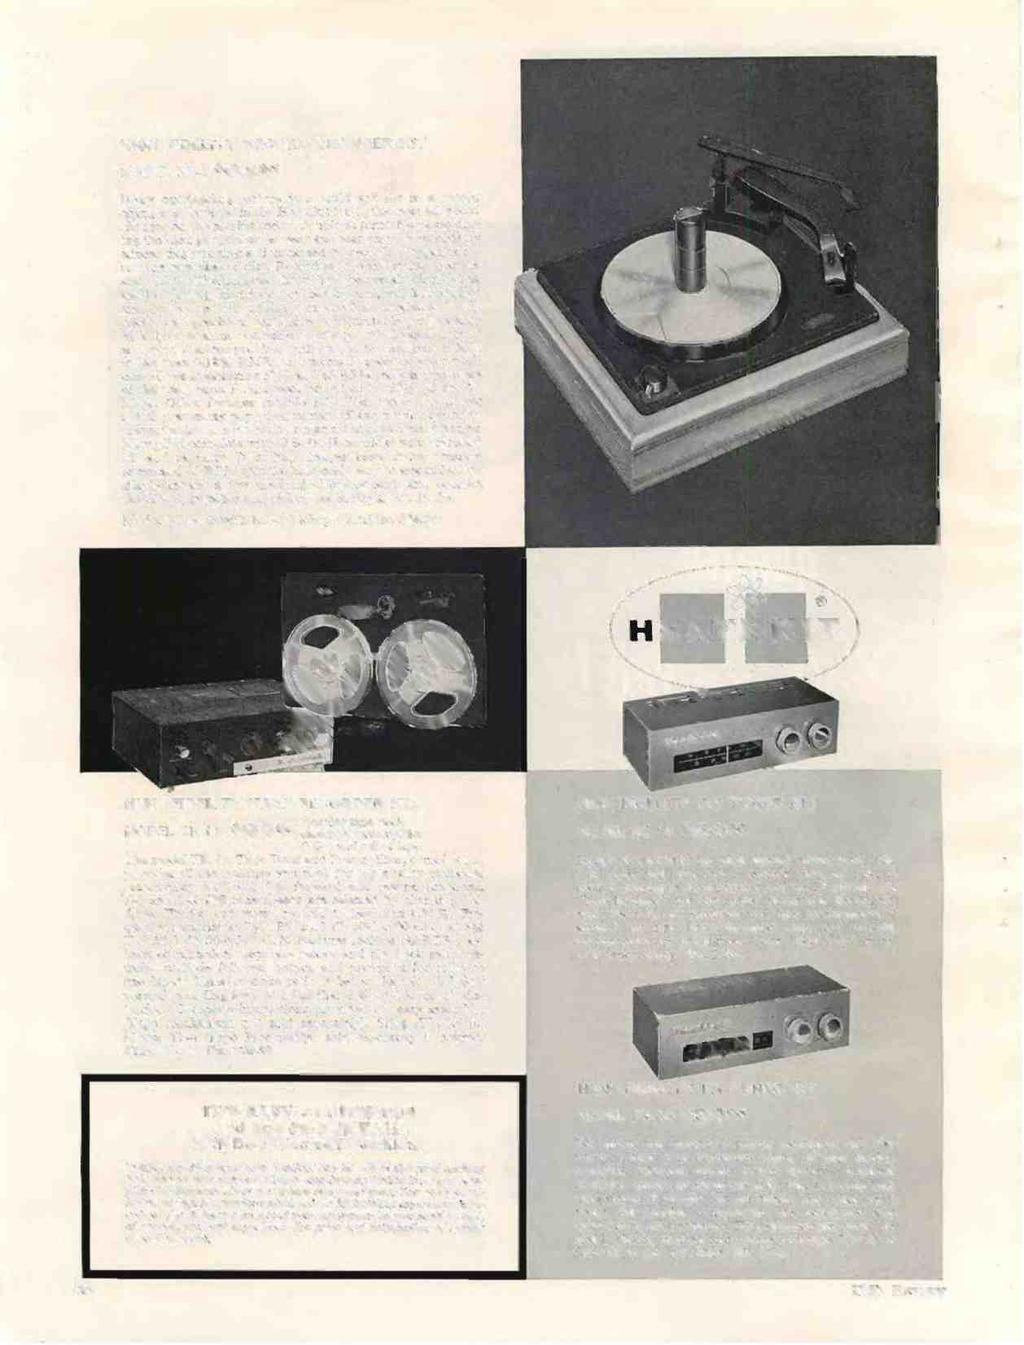 HIGH FIDELITY RECORD CHANGER KIT MODEL RP -3 $6495 Every outstanding feature you could ask for in a record changer is provided in the Hcathkit RP -3. the most advanced changer on the market today.